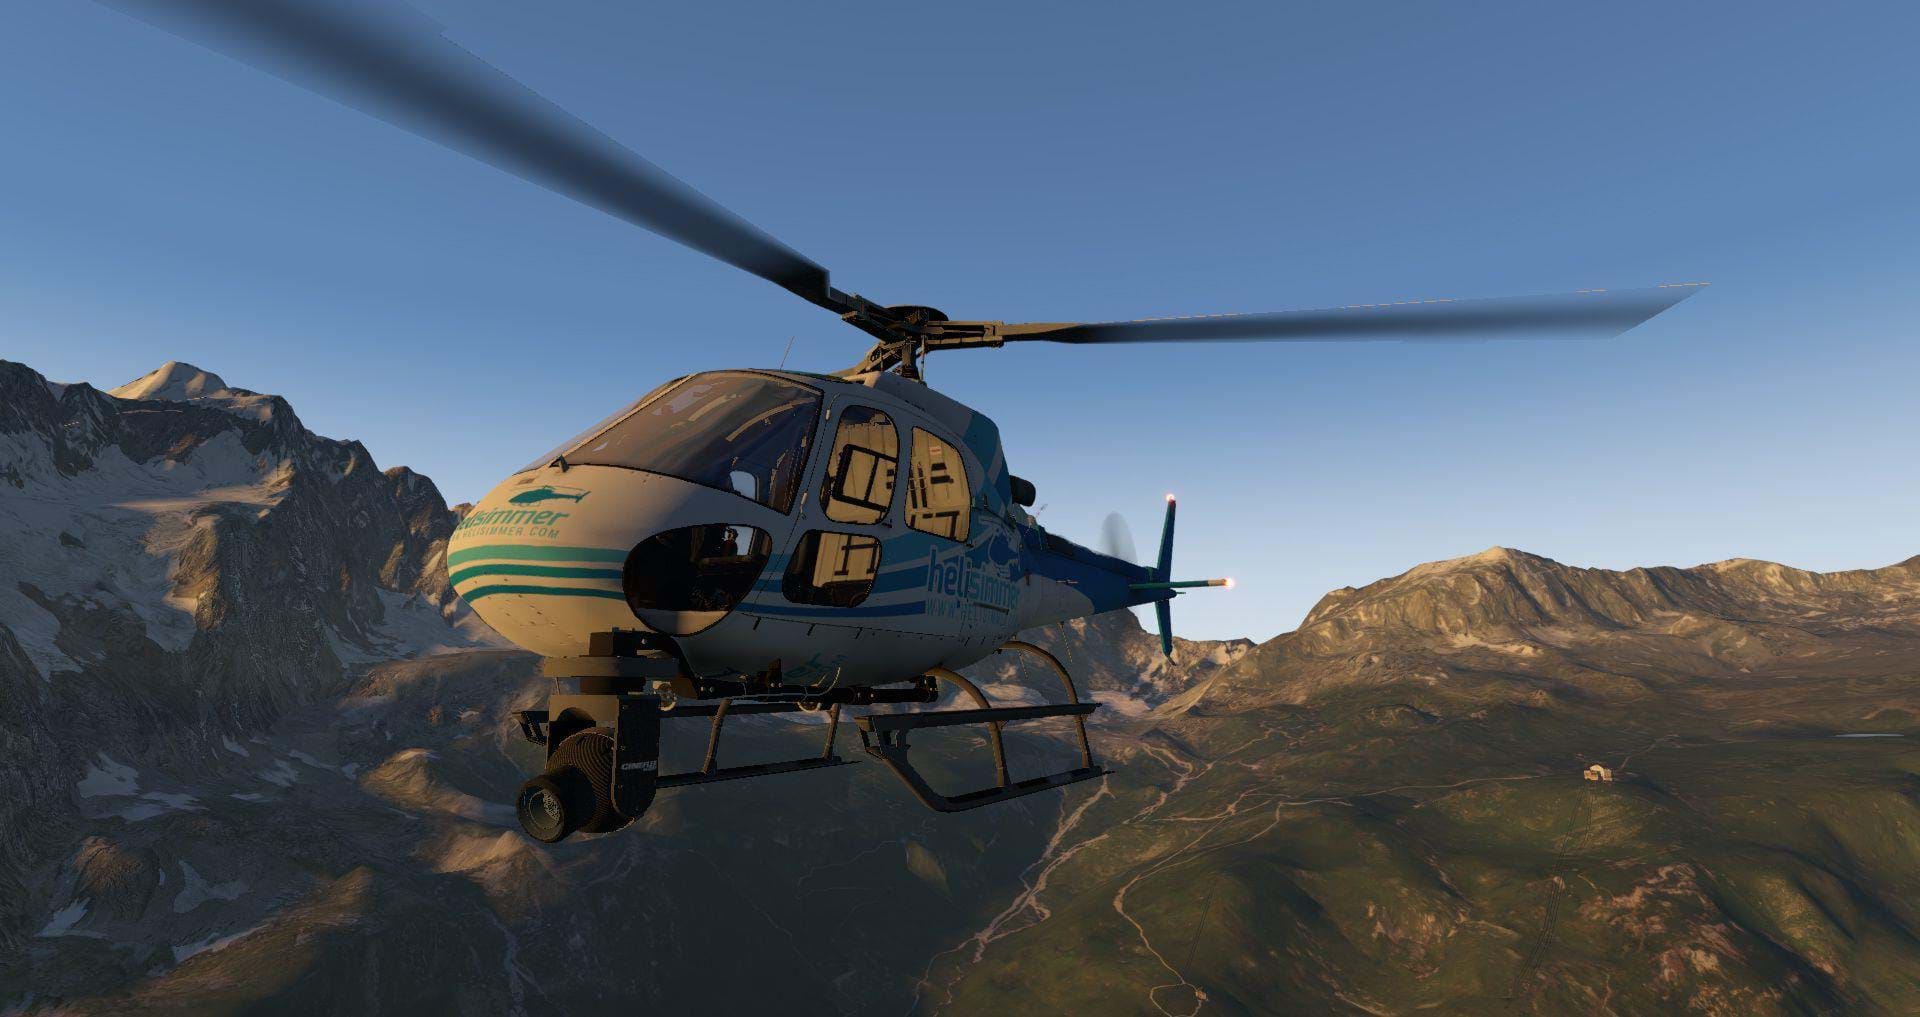 Preview: SwissCreations Pack update for the DreamFoil AS350